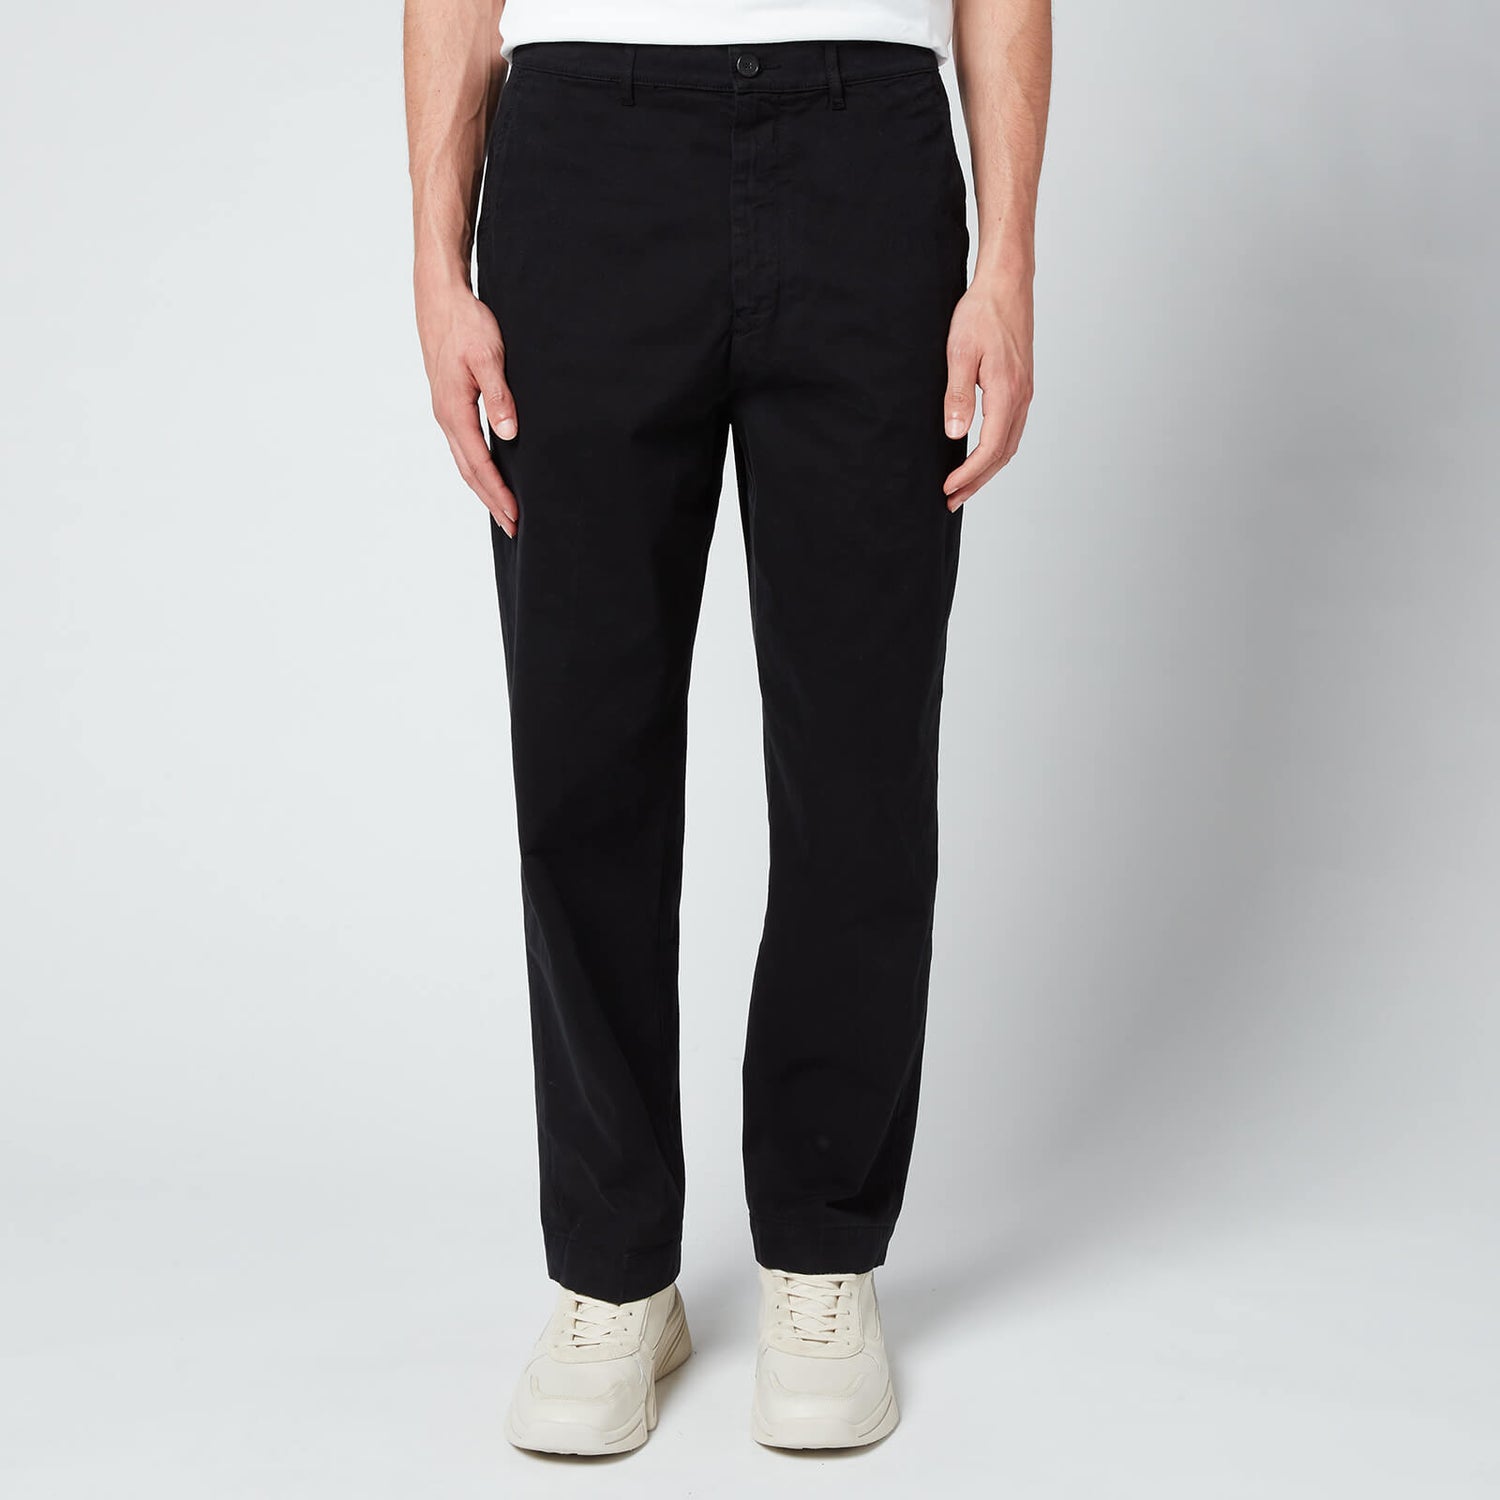 KENZO Men's Tapered Cropped Trousers - Black - 42/L